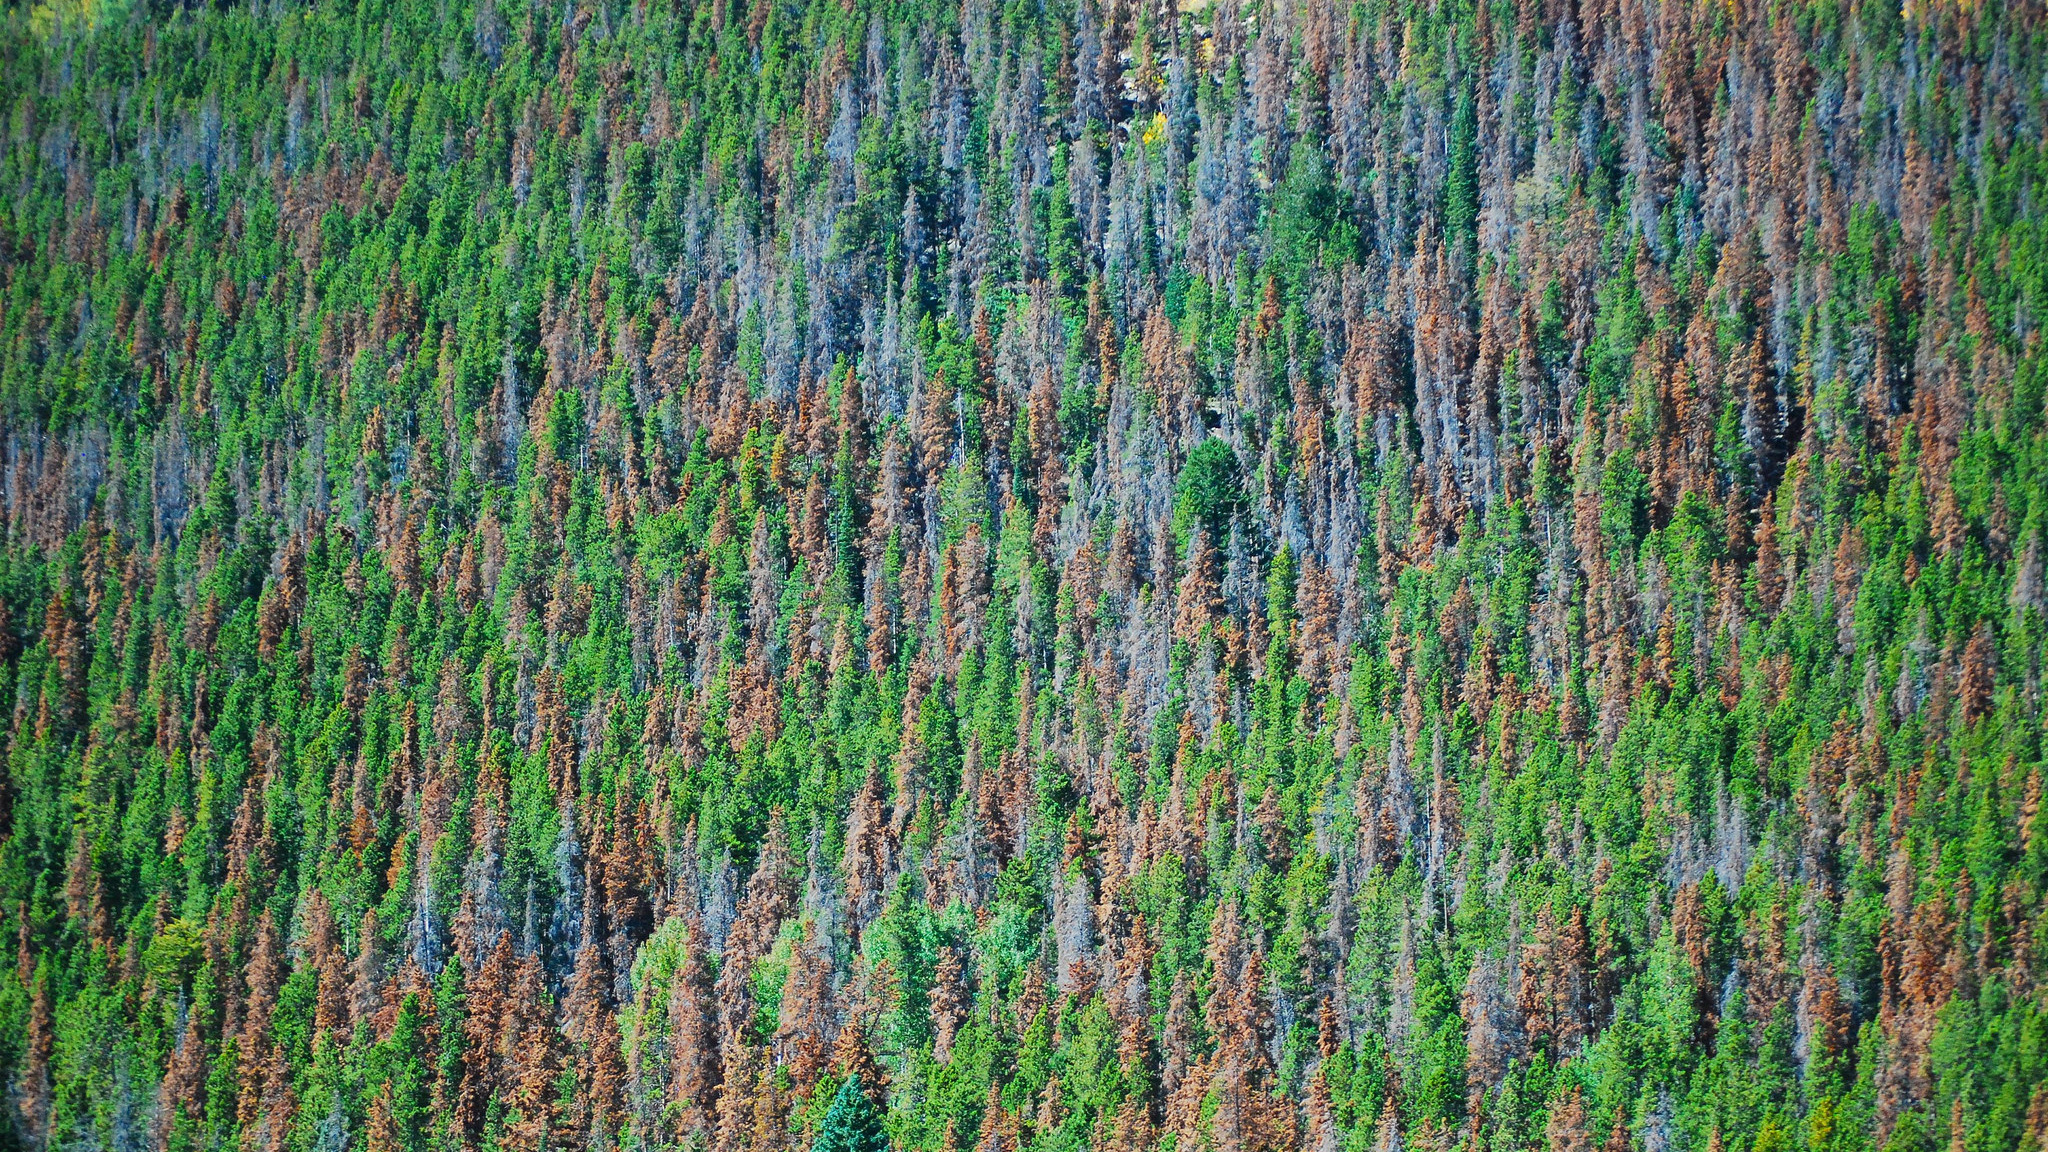 Aerial view of damage from the mountain pine beetle in a whitebark pine forest. Photo © U.S. Geological Survey/Flickr